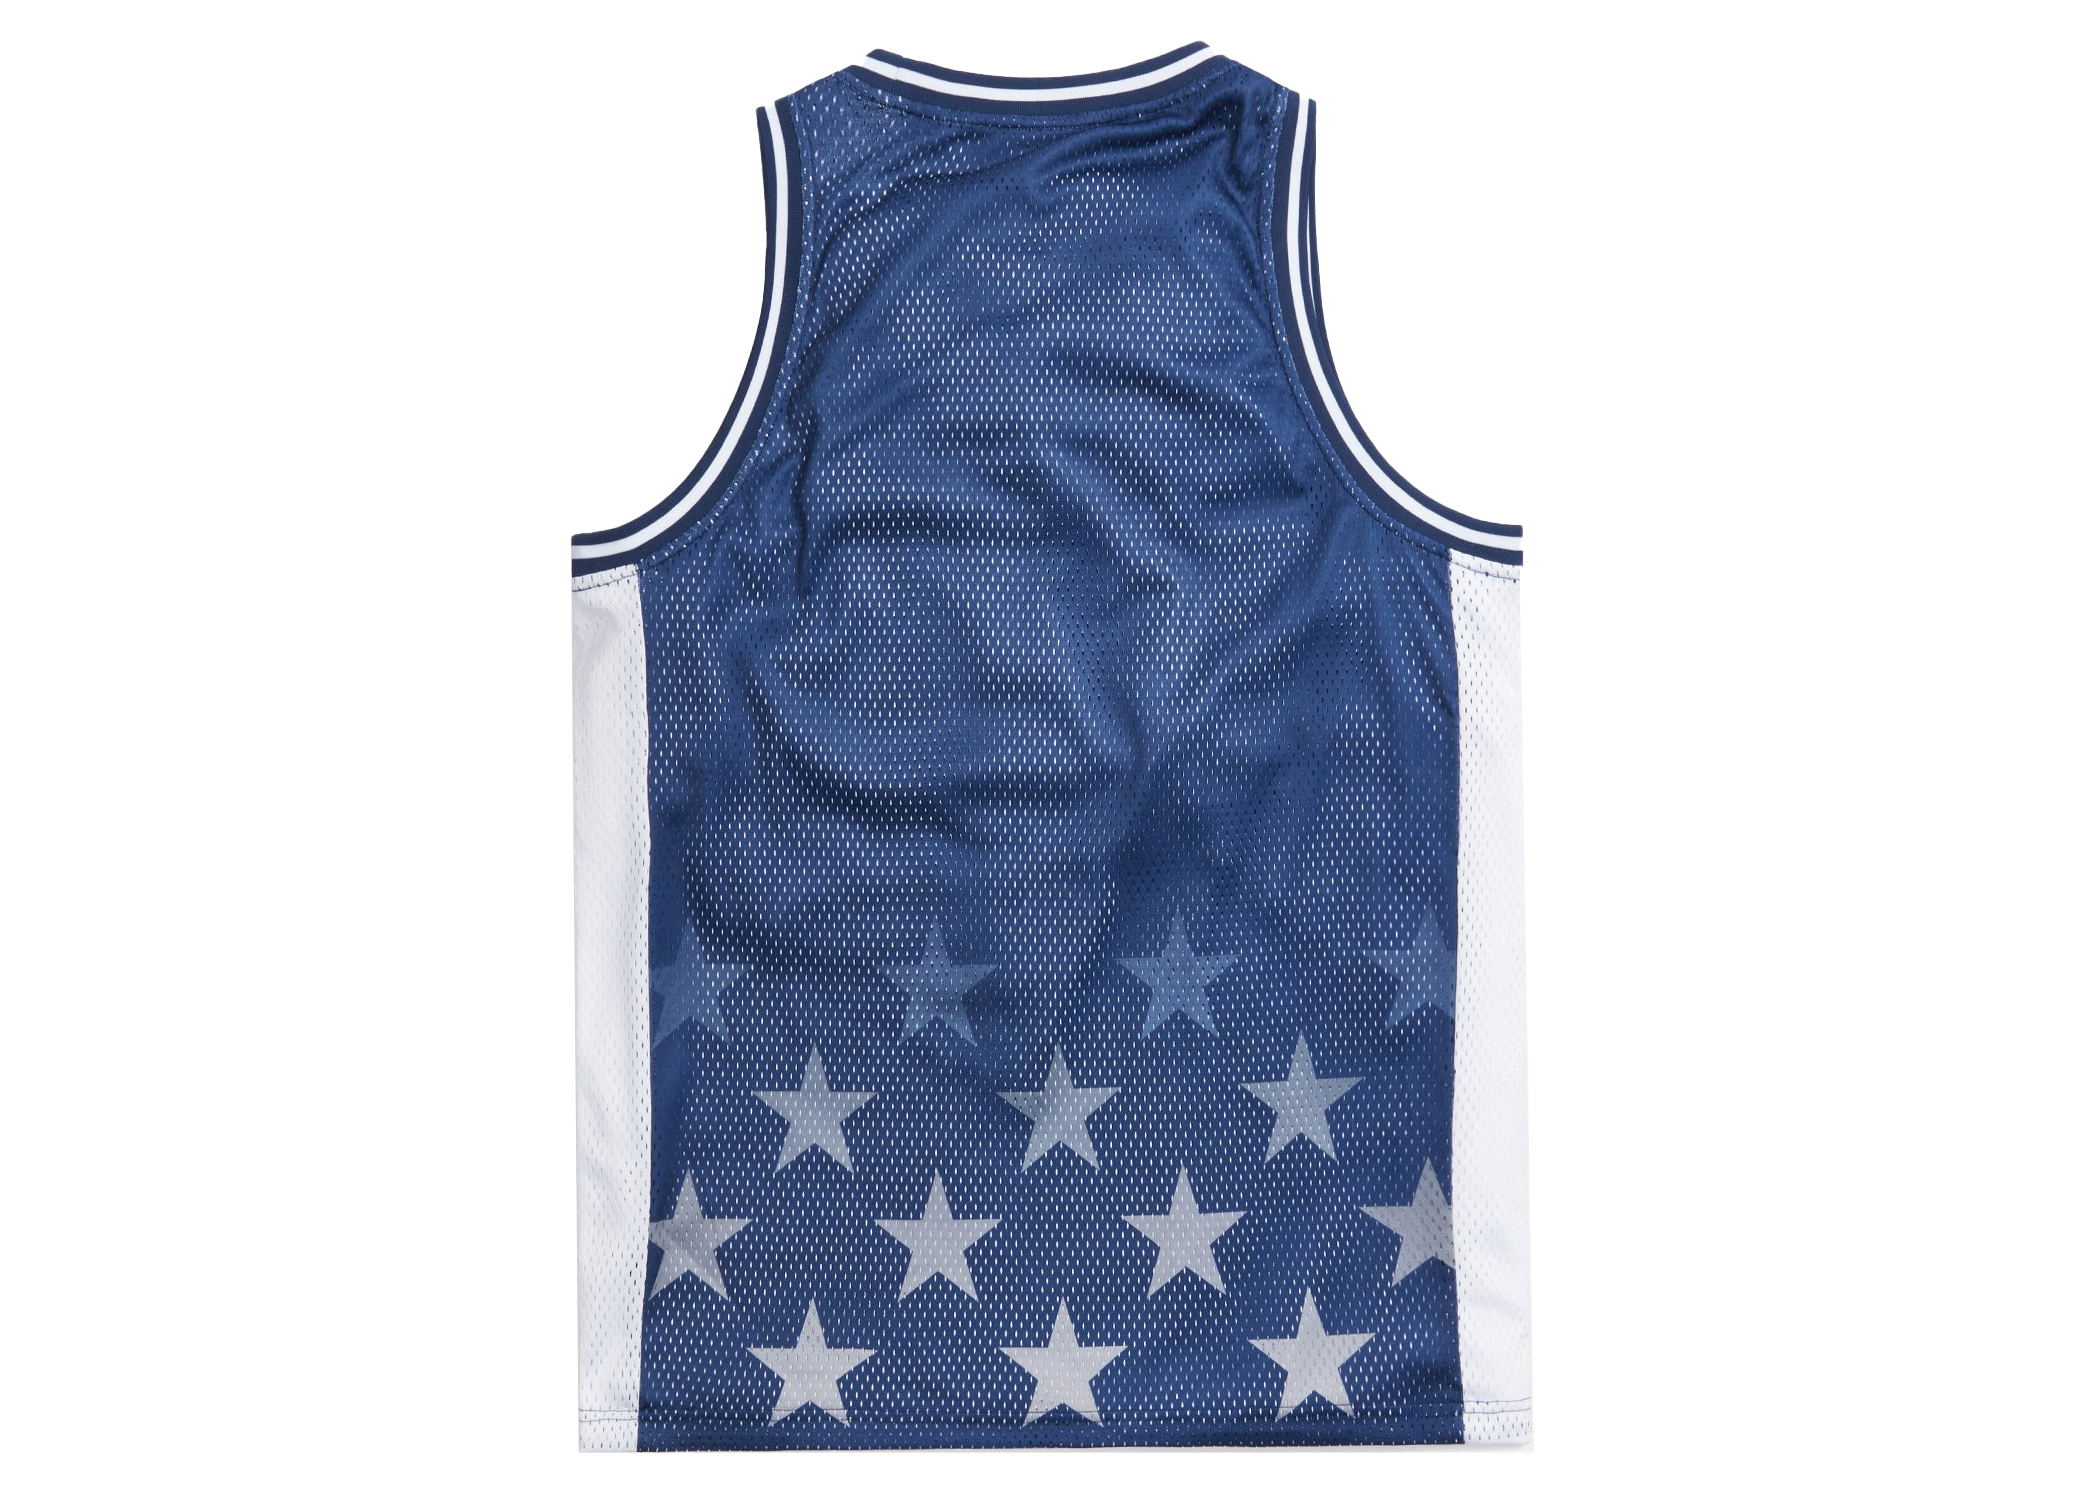 Kith for Team USA Basketball Jersey Nocturnal Men's - SS21 - US